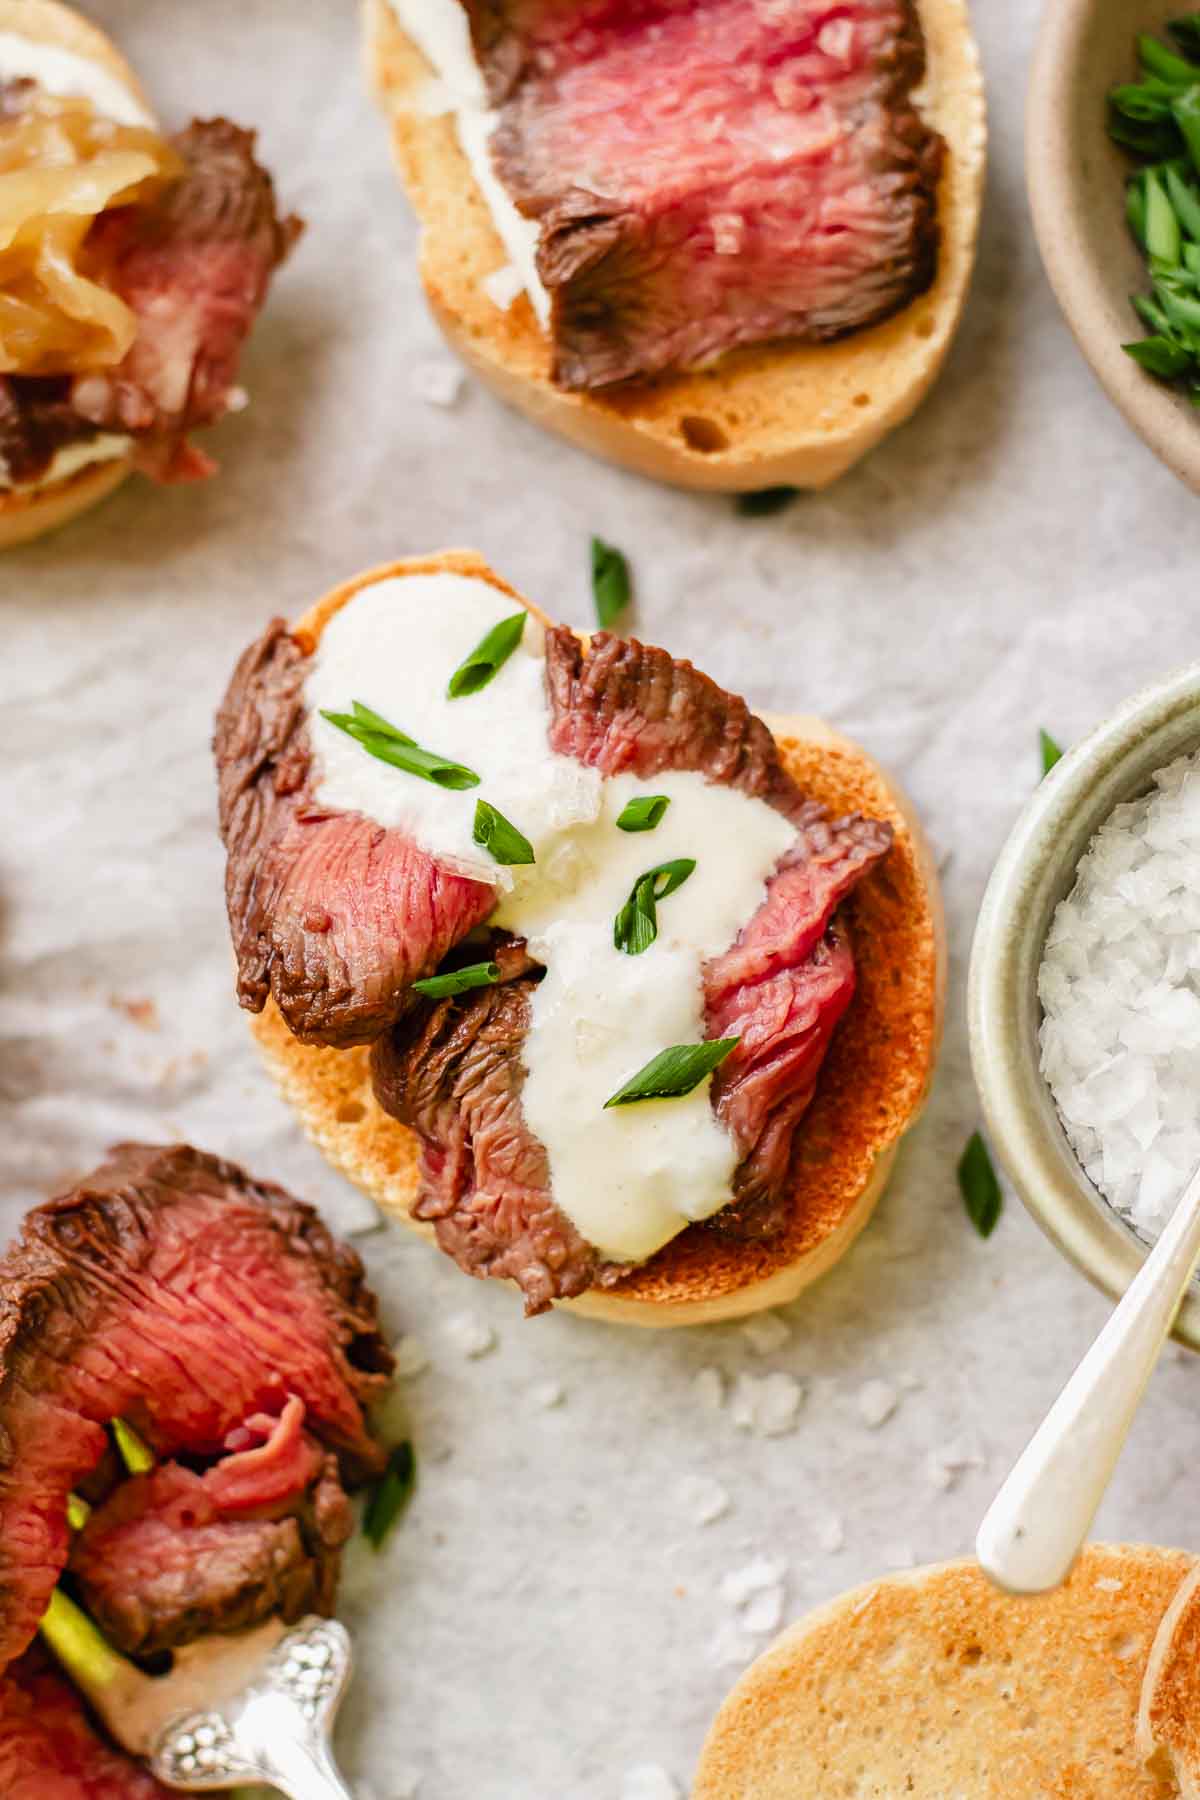 Assembled steak and horseradish crostini with chives.